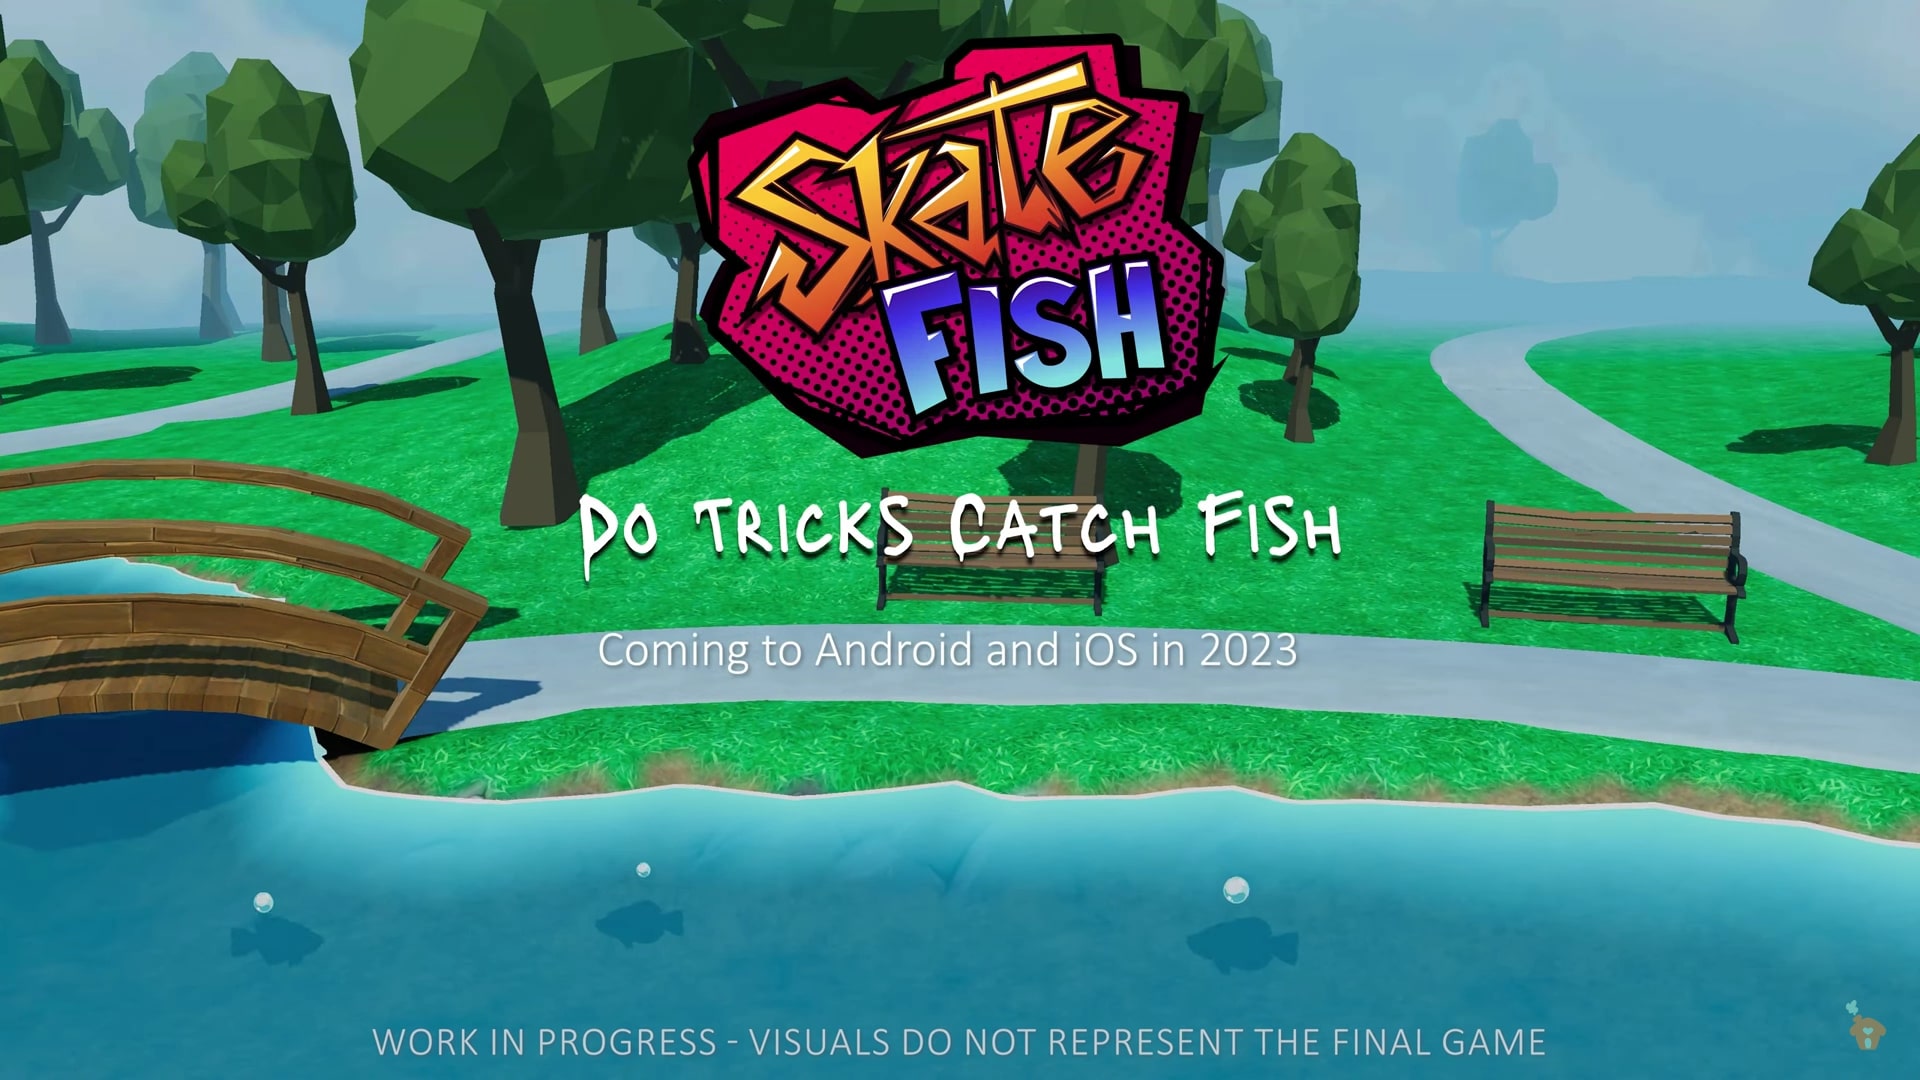 New Fishing "Skate Fish" Game Is Now Coming to Mobile Soon!